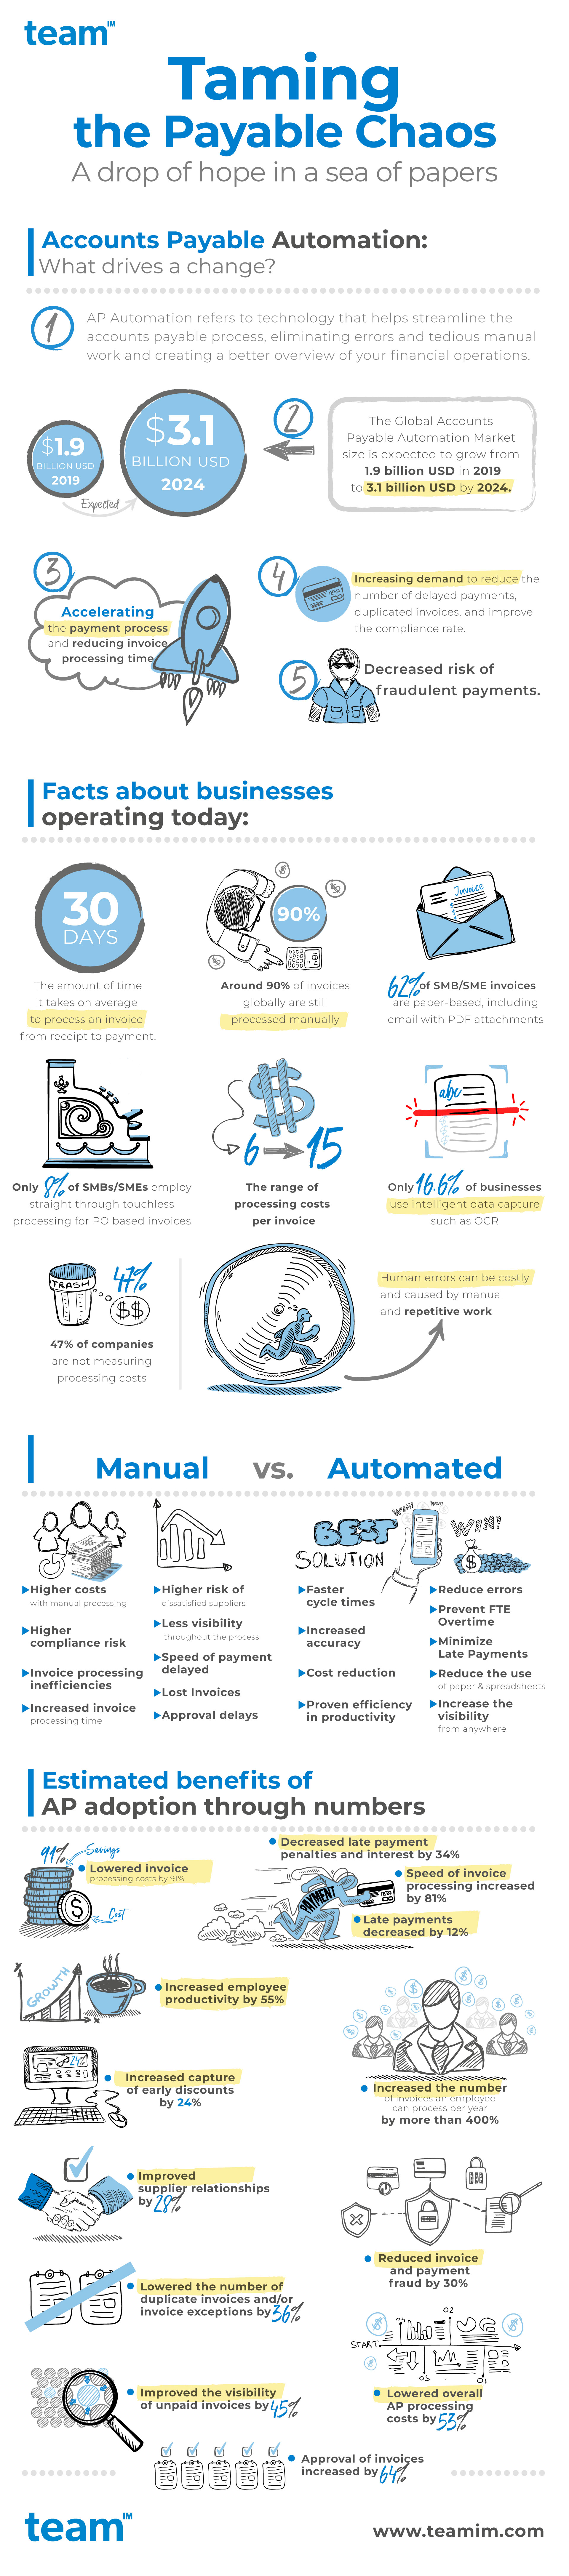 Infographic---Taming-the-Payable-Chaos---from-TEAM-IM-1